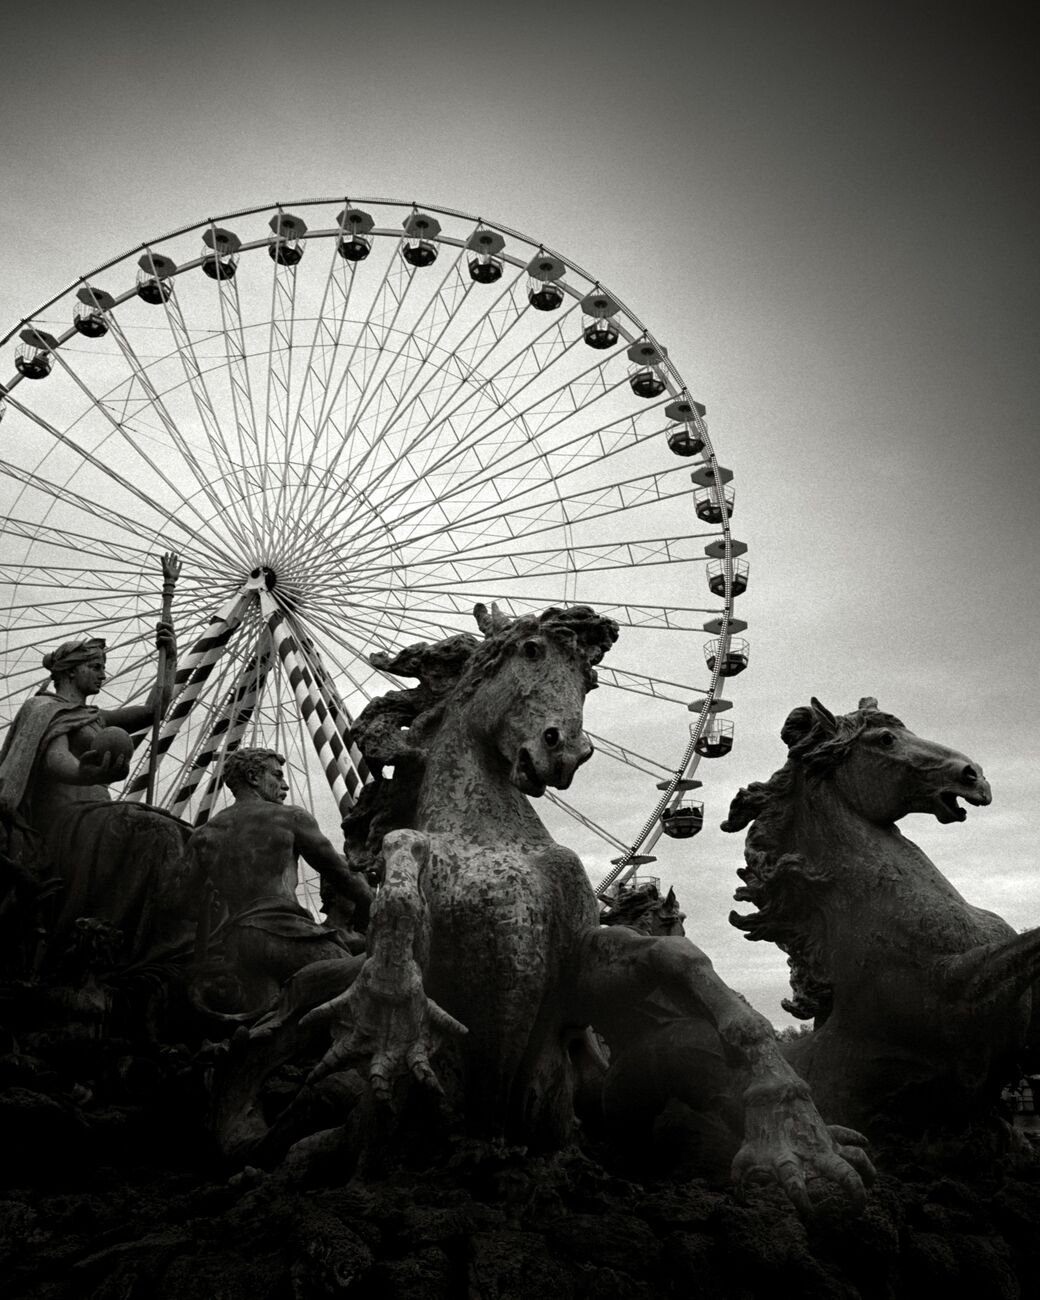 Photography 12.6 x 15.7 in, Girondins Fountain and Big Wheel. Ref-11646-12 - Denis Olivier Art Photography